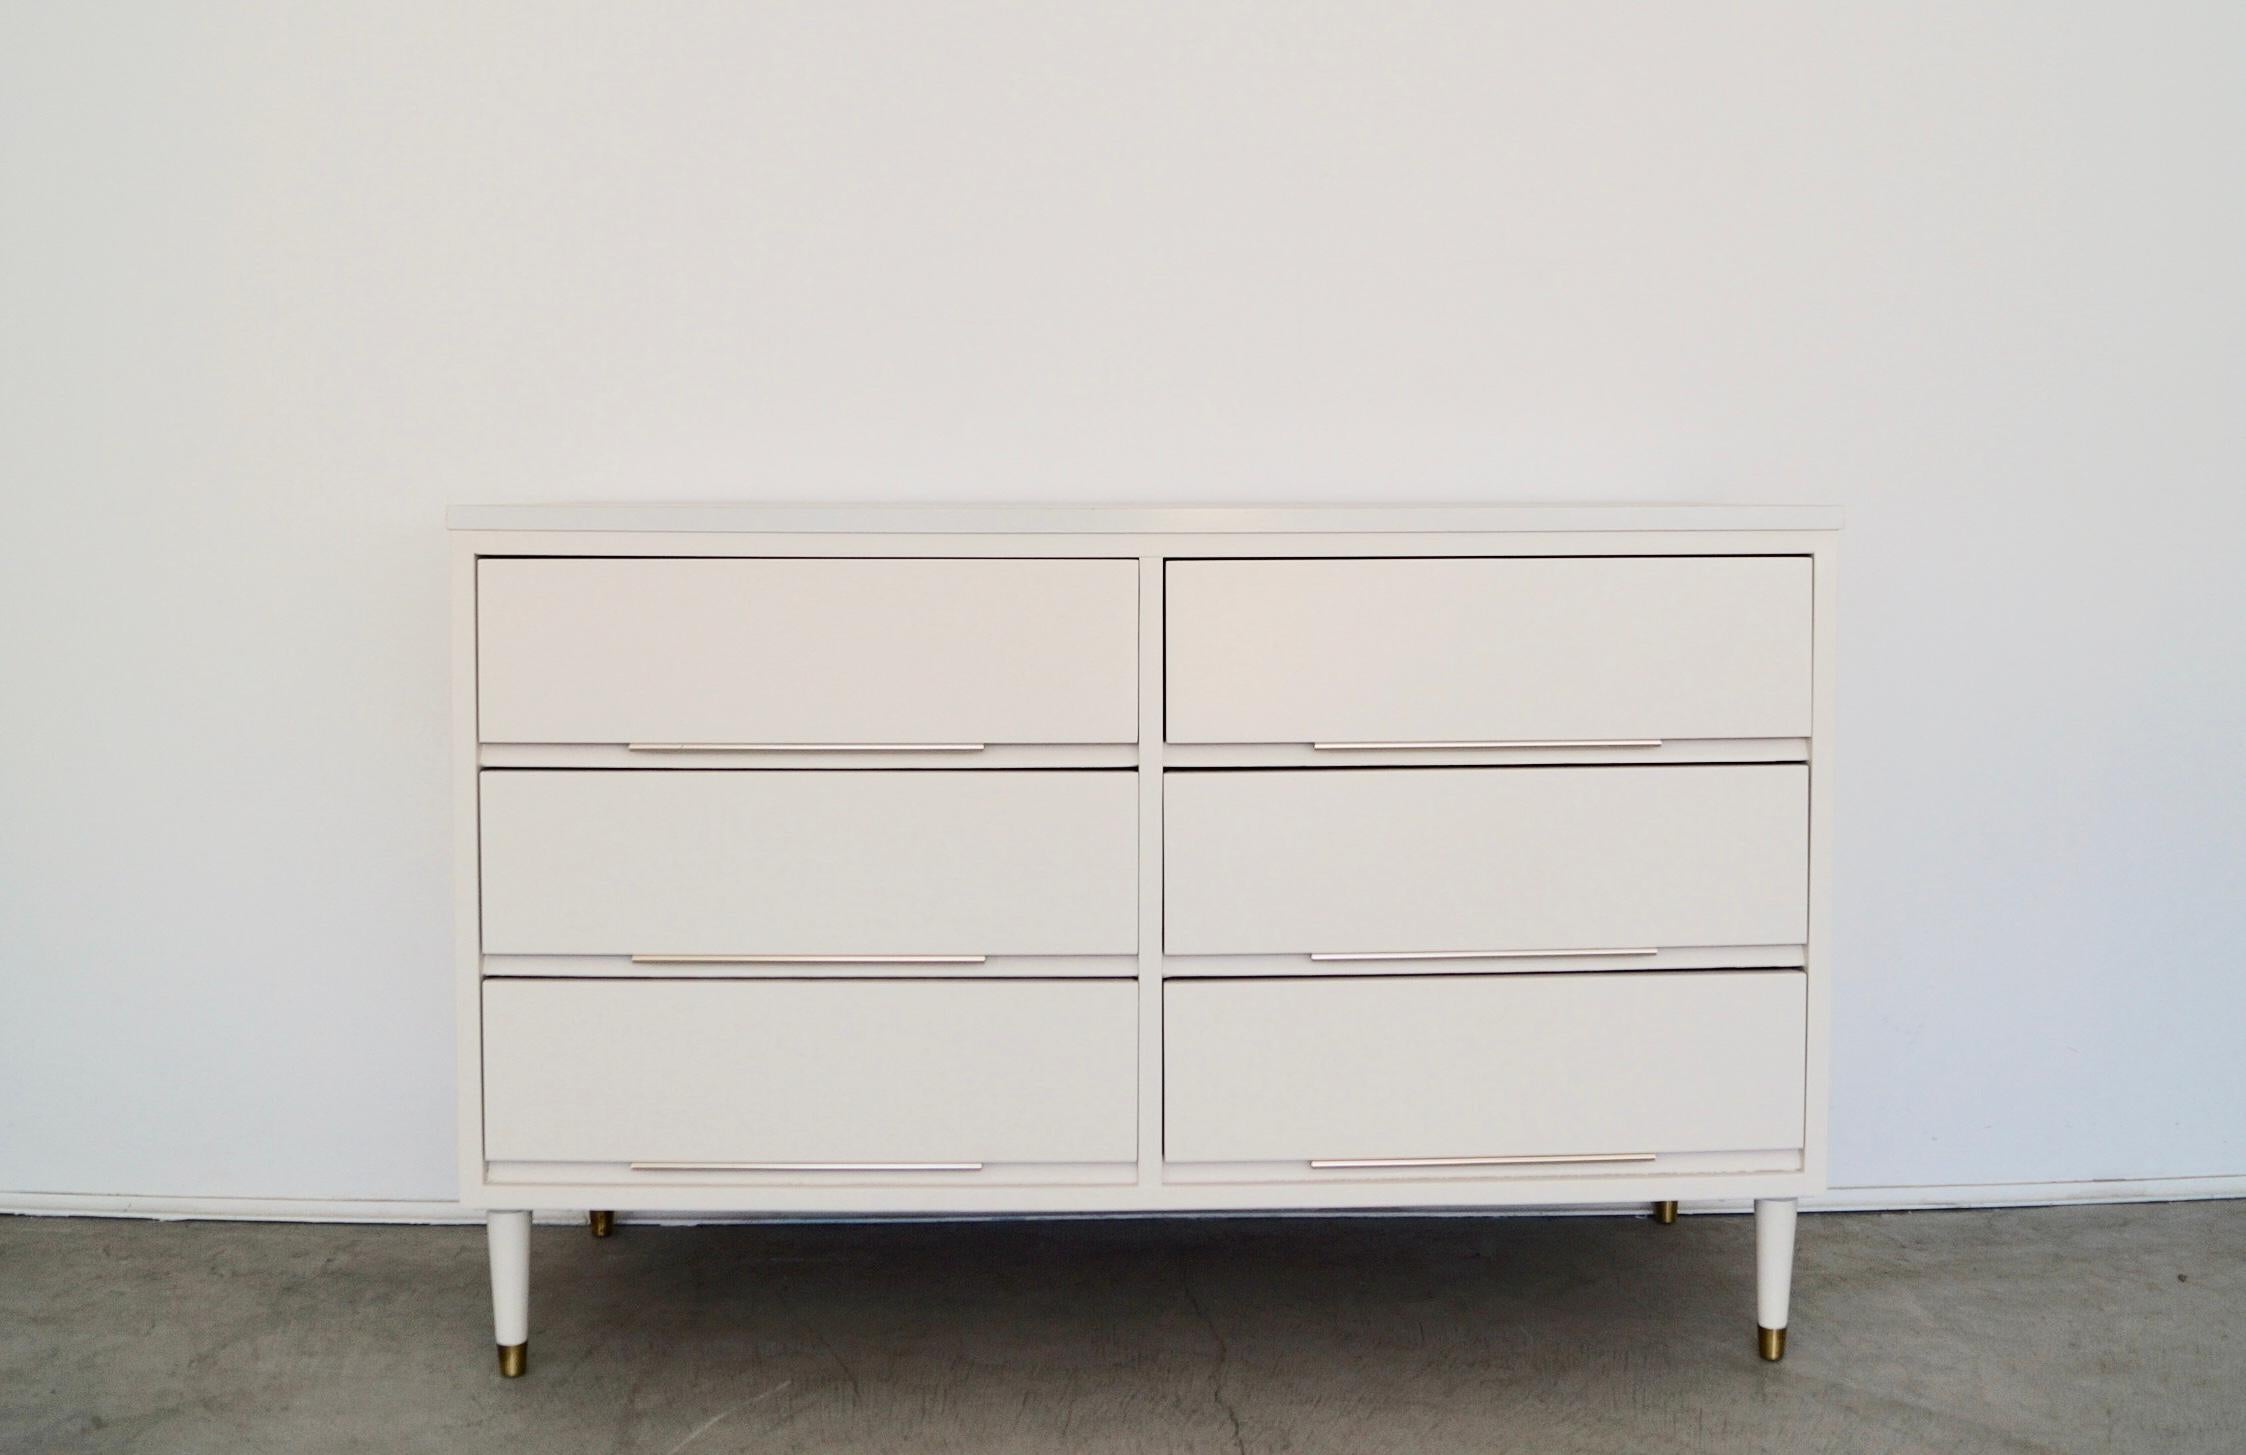 We have this lovely original Mid-century Modern dresser for sale. It was professionally refinished in white, and has the original aluminum pull handles in brass. It has the classic tapered pencil legs capped in brass, and is a high-quality piece